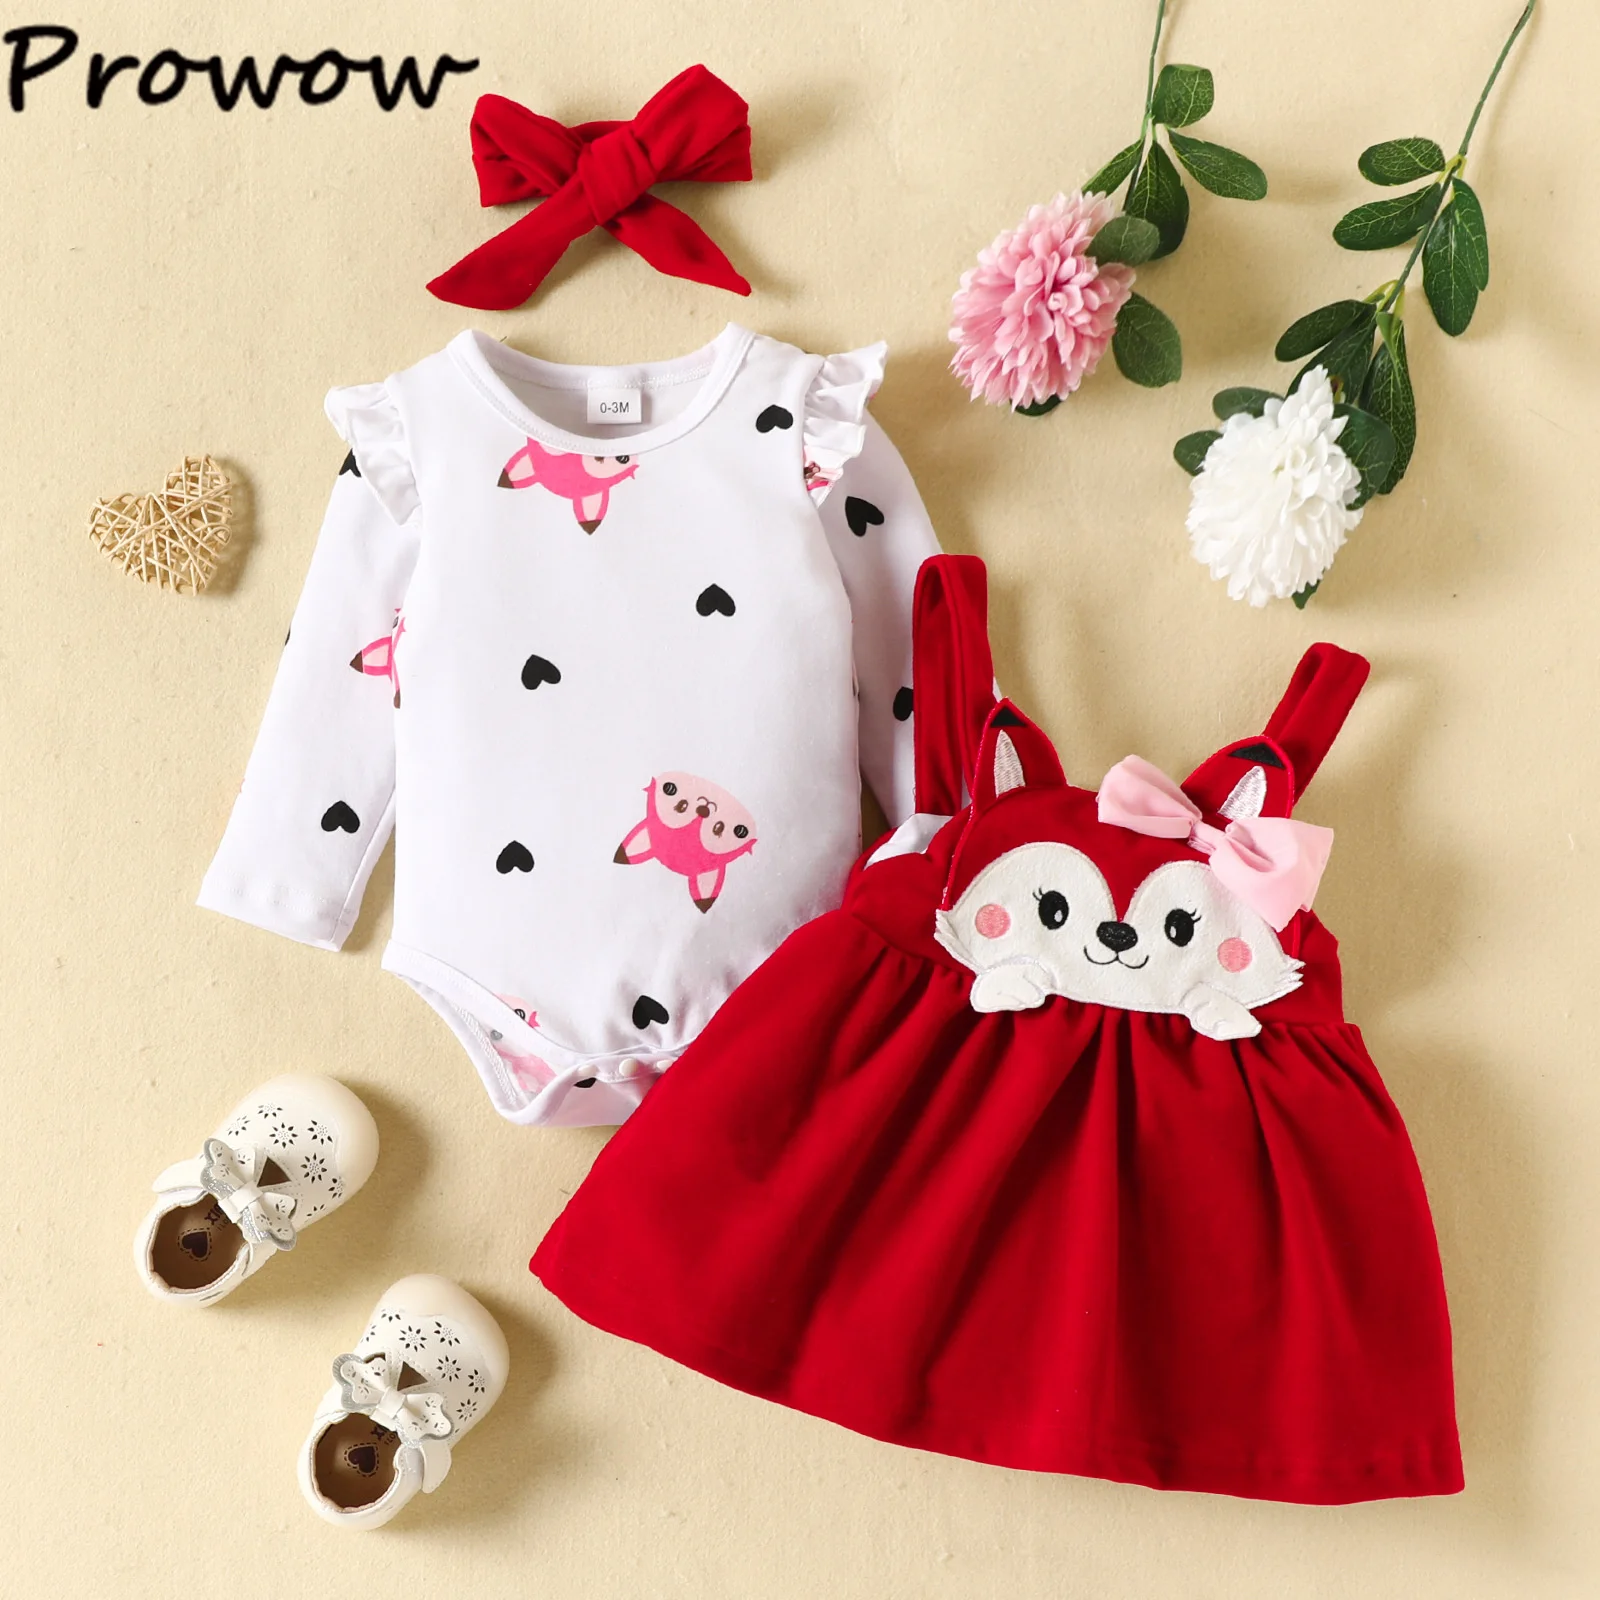 Easy Shopping for Newborn Baby Clothes Online